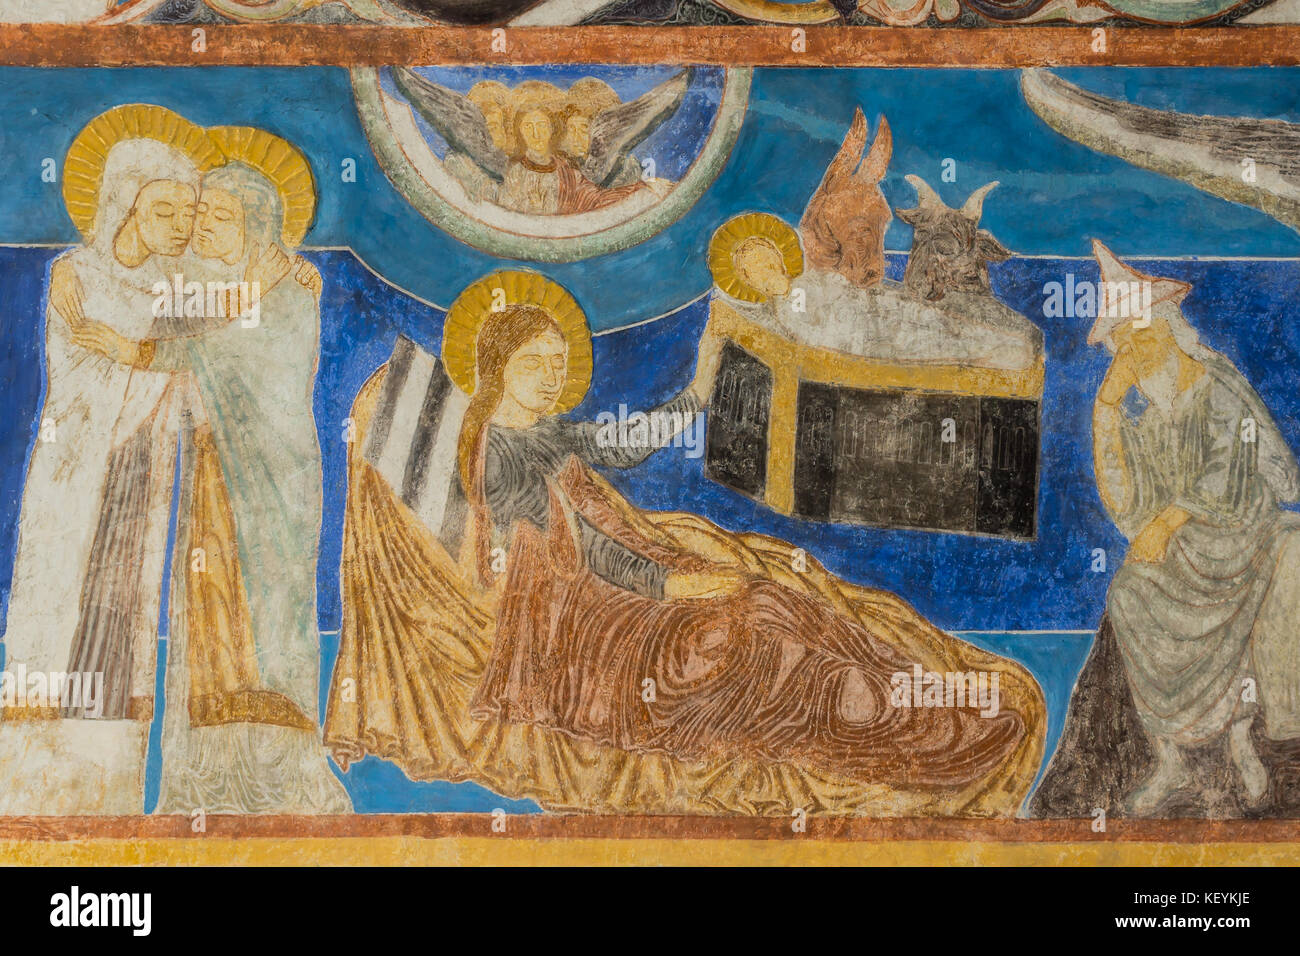 Mary visits Elisabeth. The birth in the stable, Christmas fresco in a medieval church. Bjaresjo, Sweden, September 4, 2014 Stock Photo